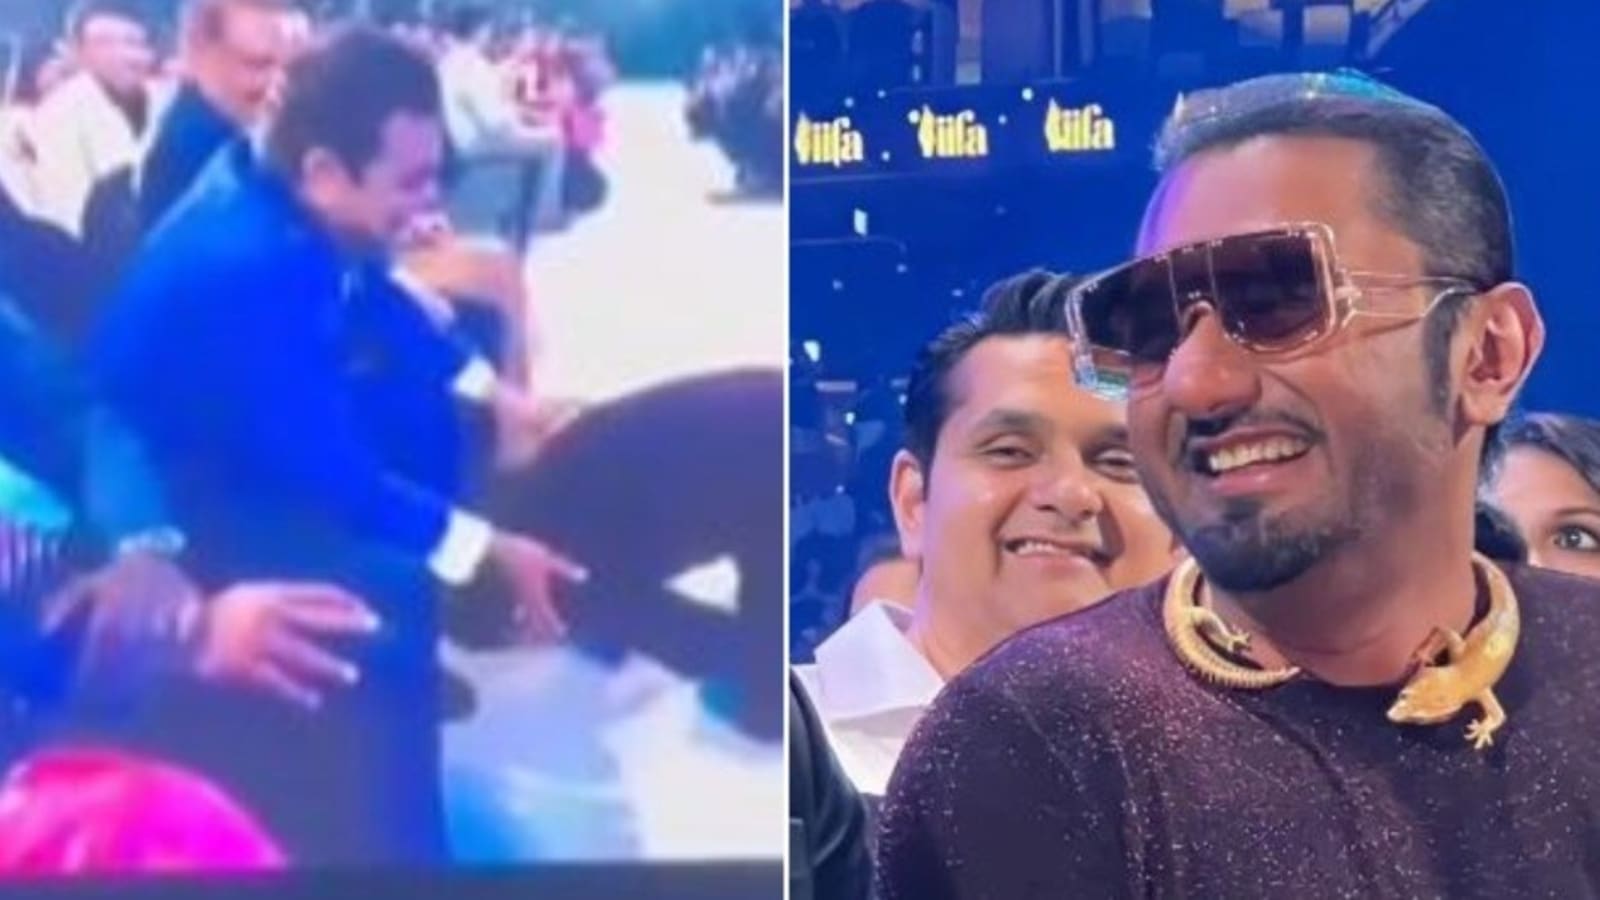 Honey Singh bows down at AR Rahman's feet during IIFA rehearsals, calls it 'moment of my life'. Watch video